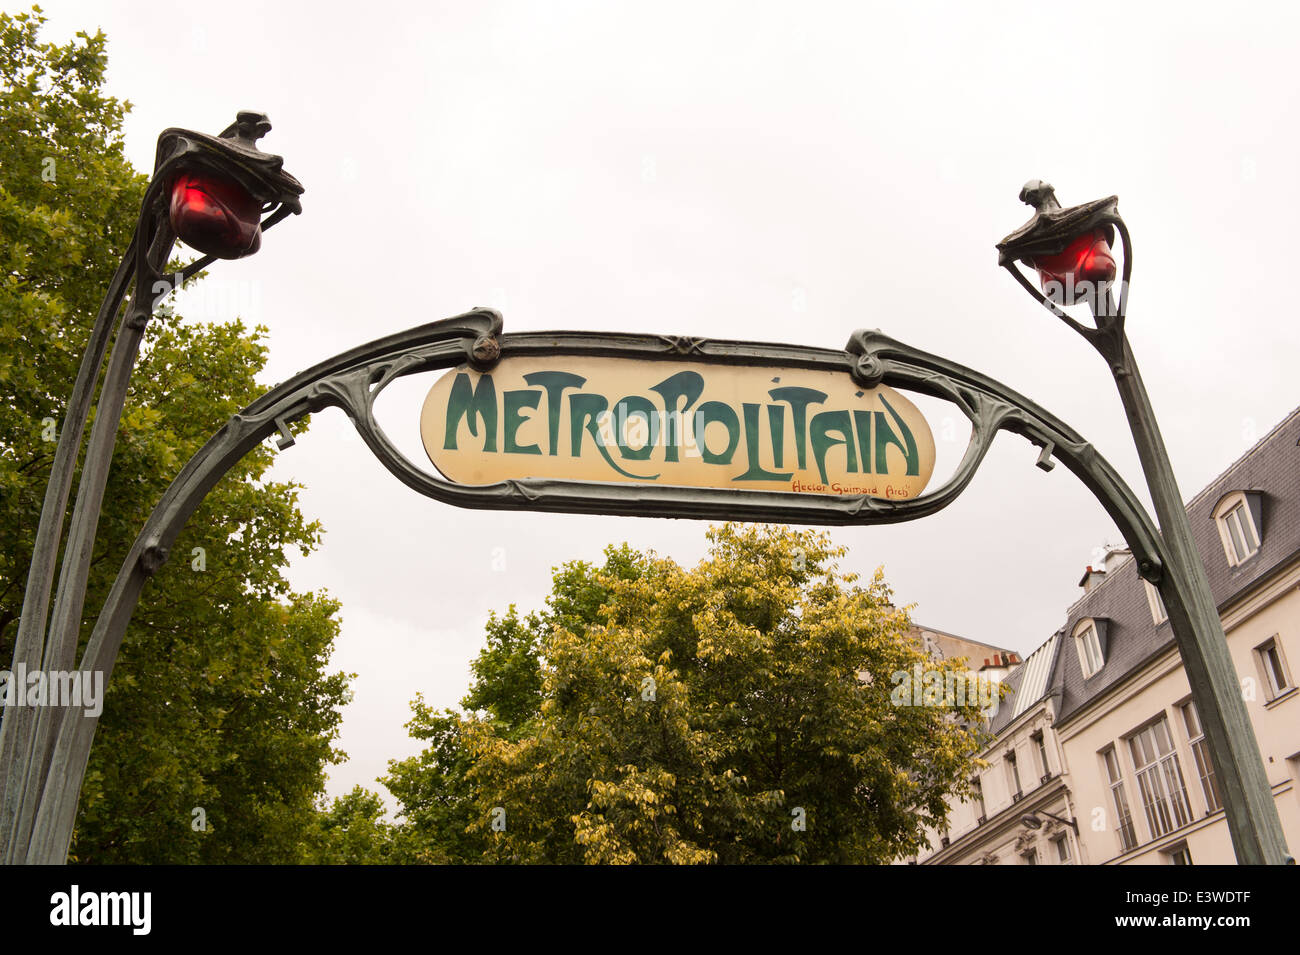 metropolitain metro subway station sign designed by hector guimard in the art nouveau style Stock Photo